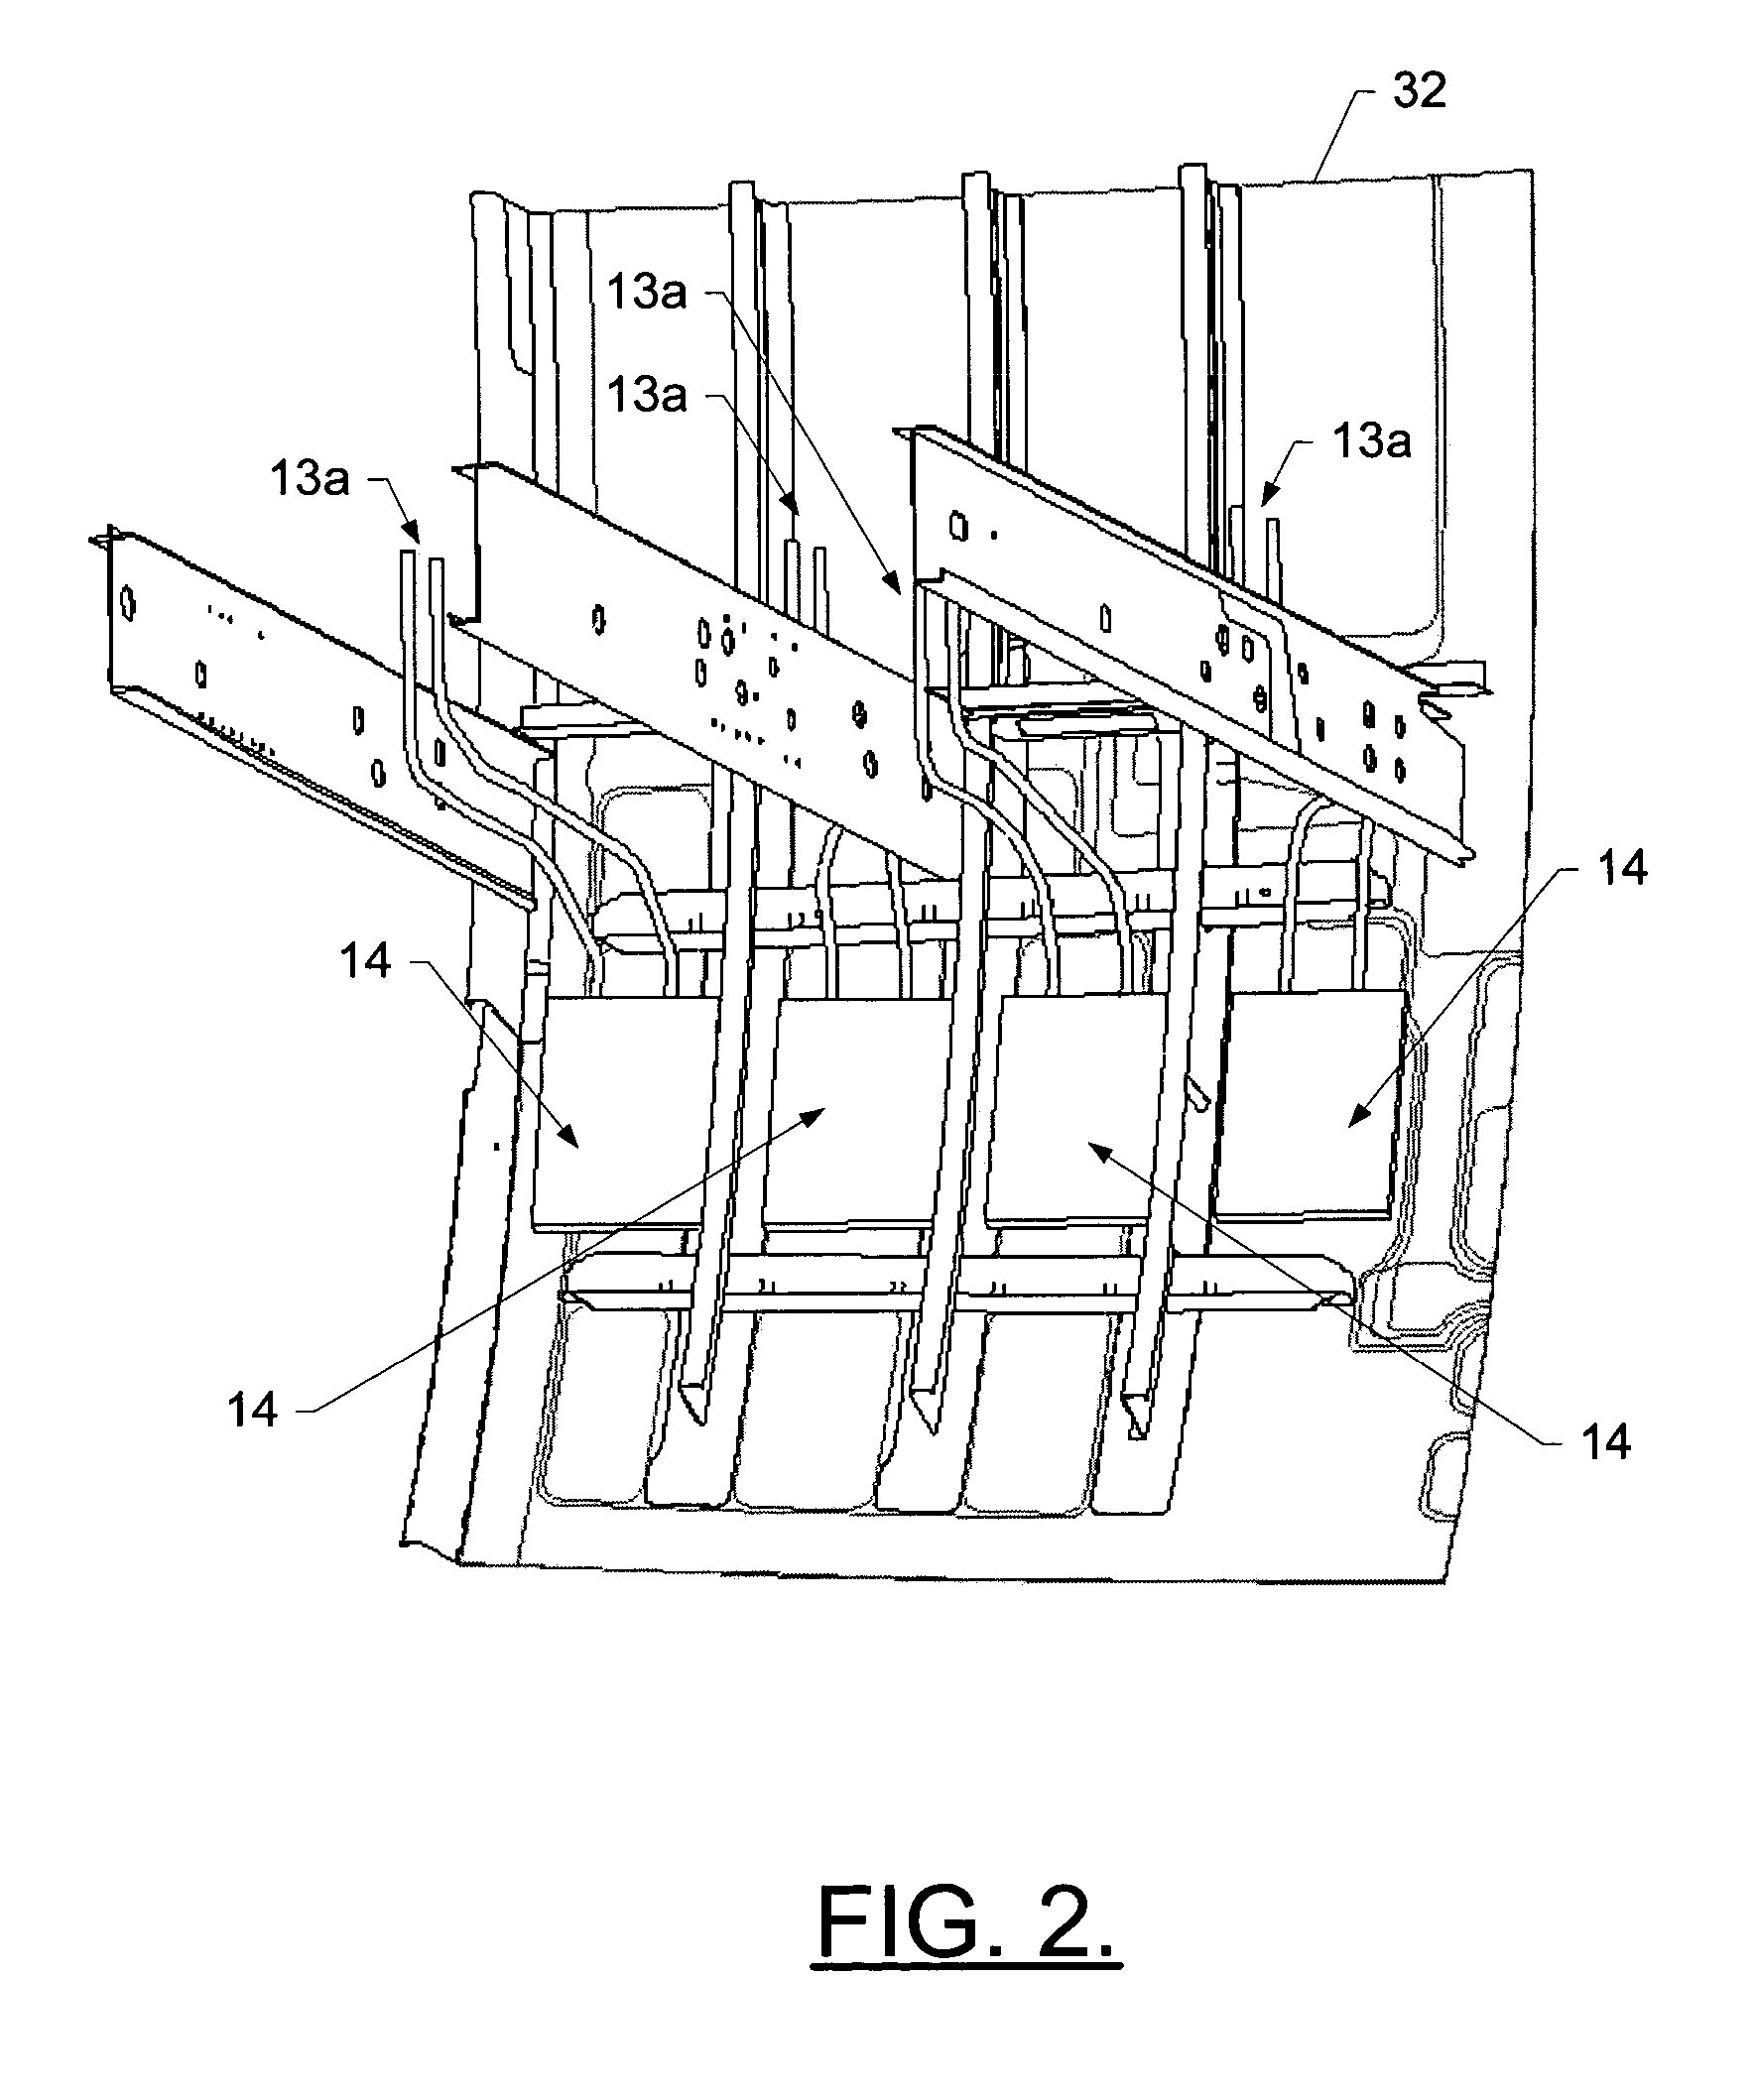 System and method of refrigerating at least one enclosure